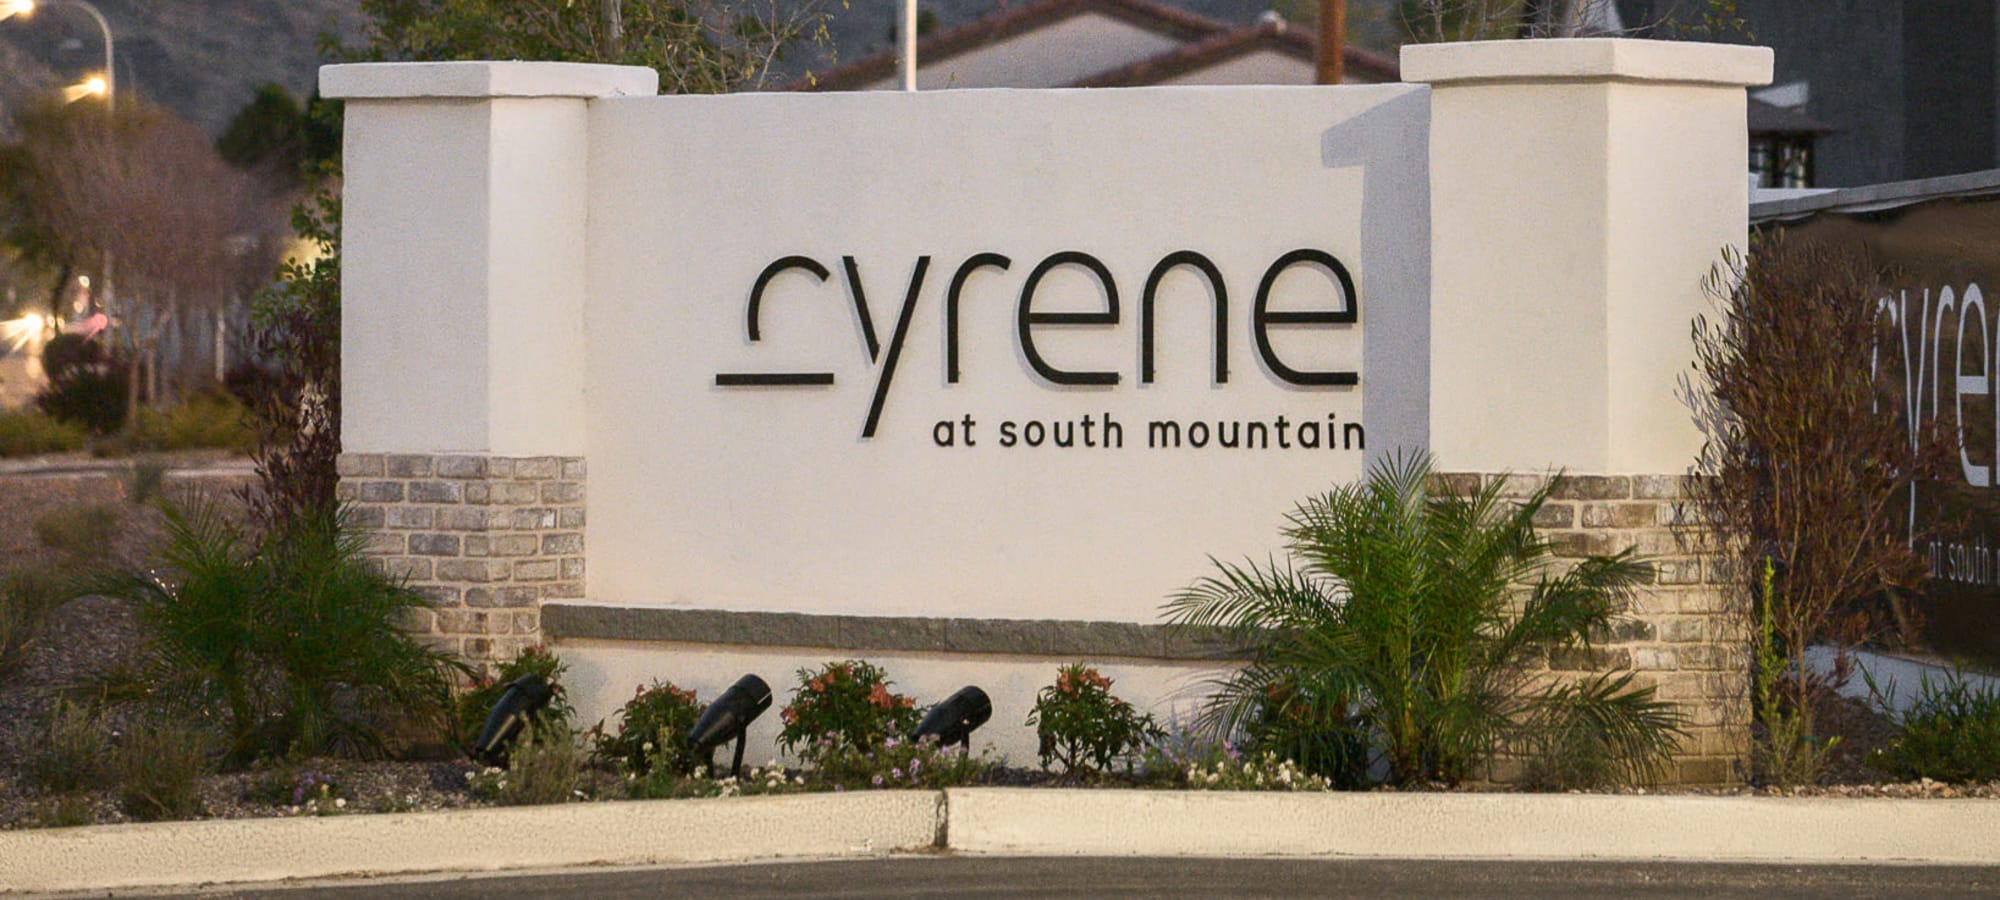 Monument signage at Cyrene at South Mountain in Phoenix, Arizona